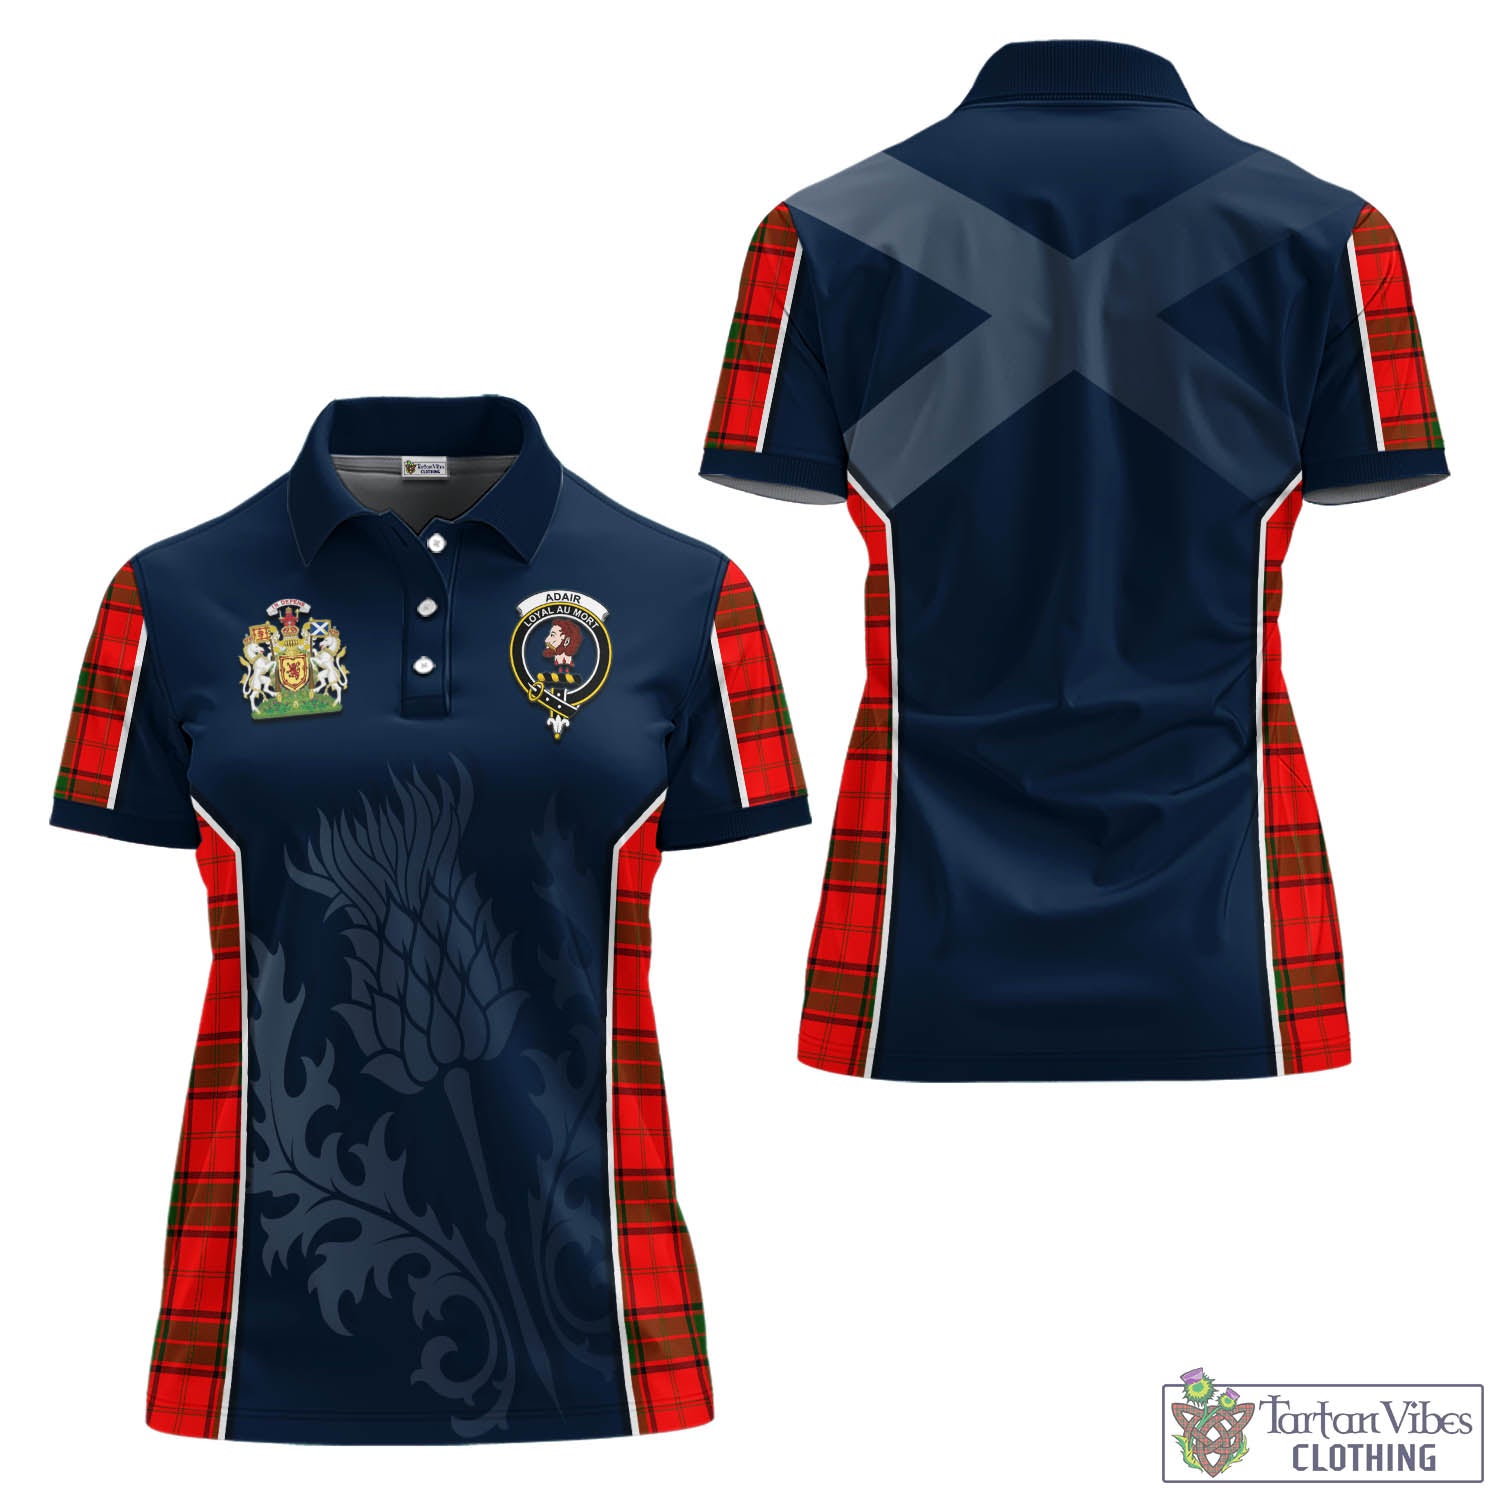 Tartan Vibes Clothing Adair Tartan Women's Polo Shirt with Family Crest and Scottish Thistle Vibes Sport Style